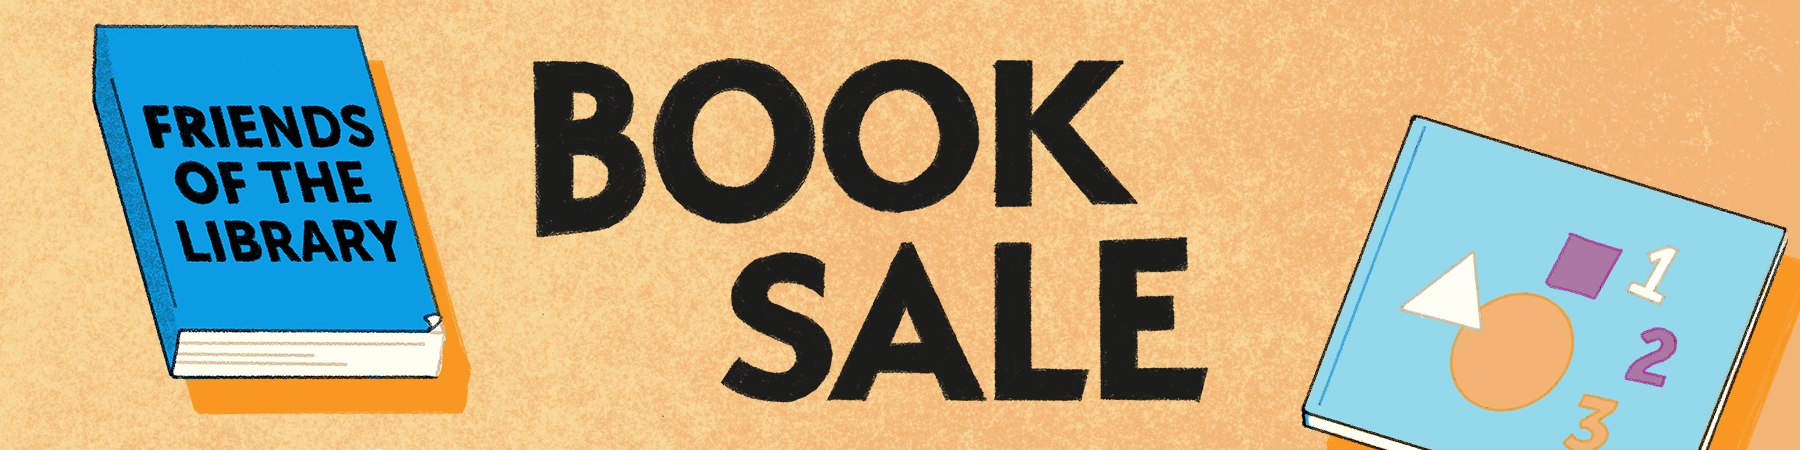 Graphic with the text "Book Sale" in black letters on an orange background. There are two illustrations of books, one book with basic shapes on it in blue, and another blue book with the text "Friends of the Library" on the cover. 